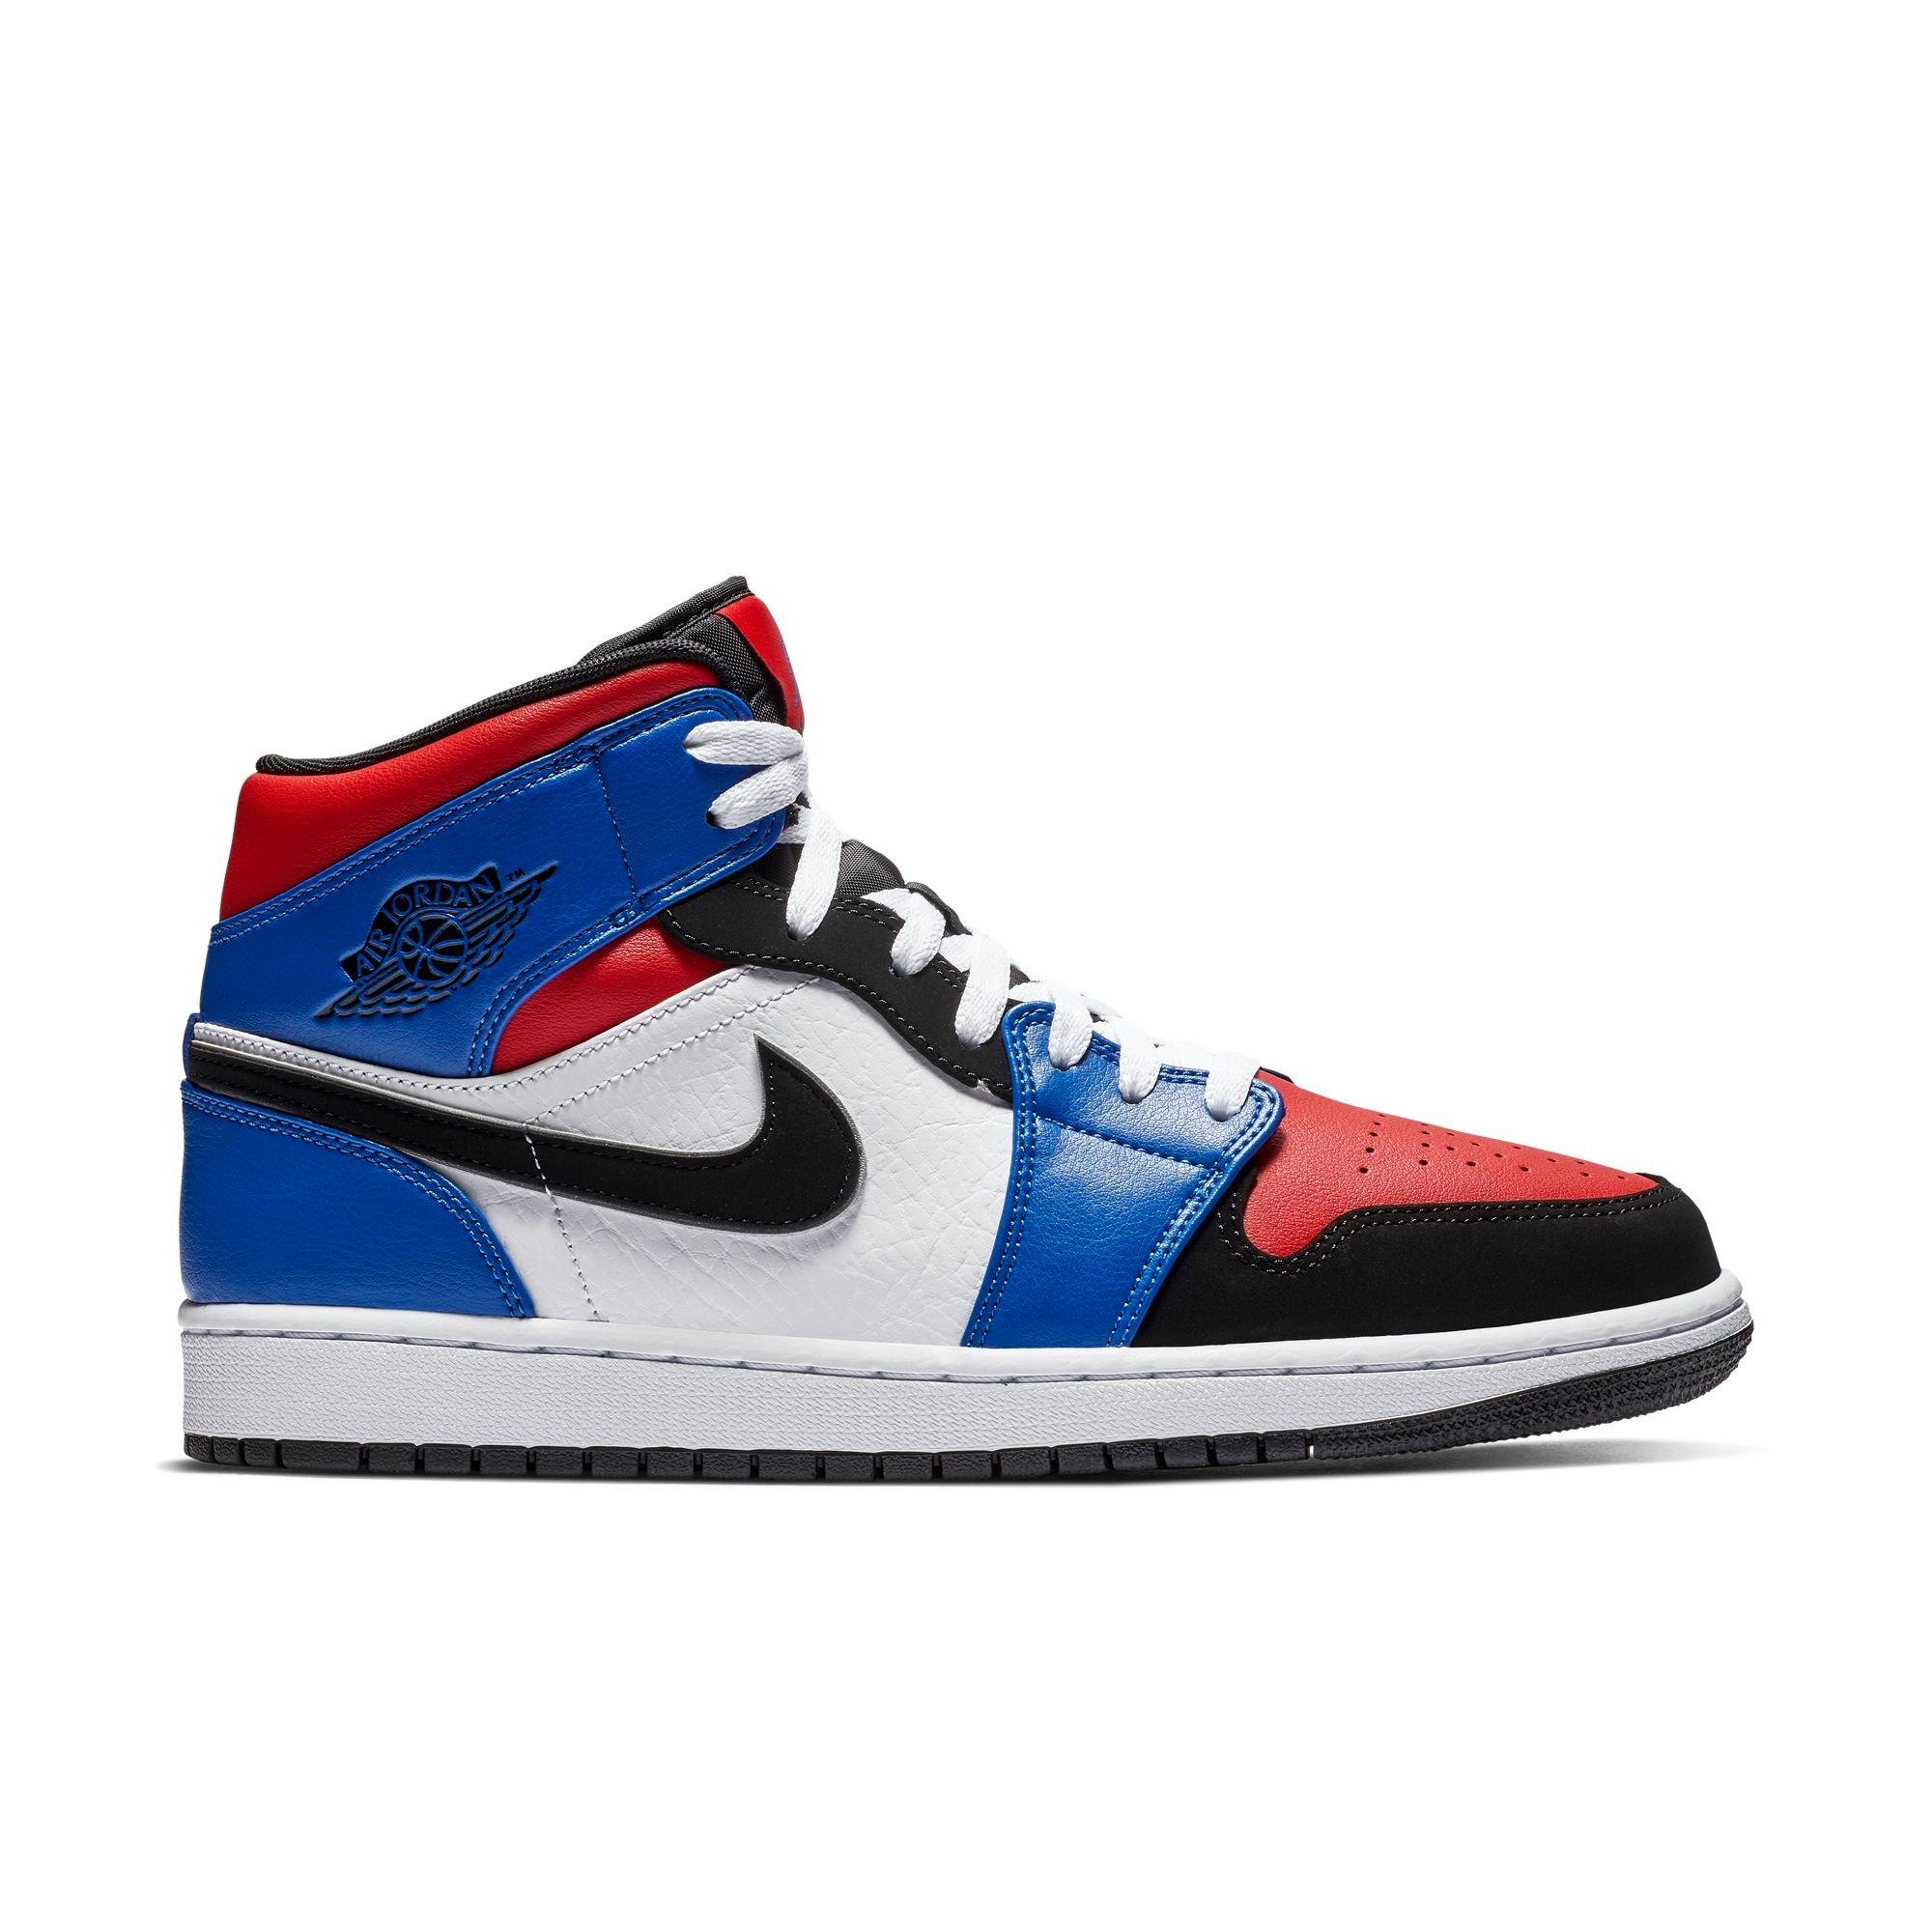 retro 1 blue red and white